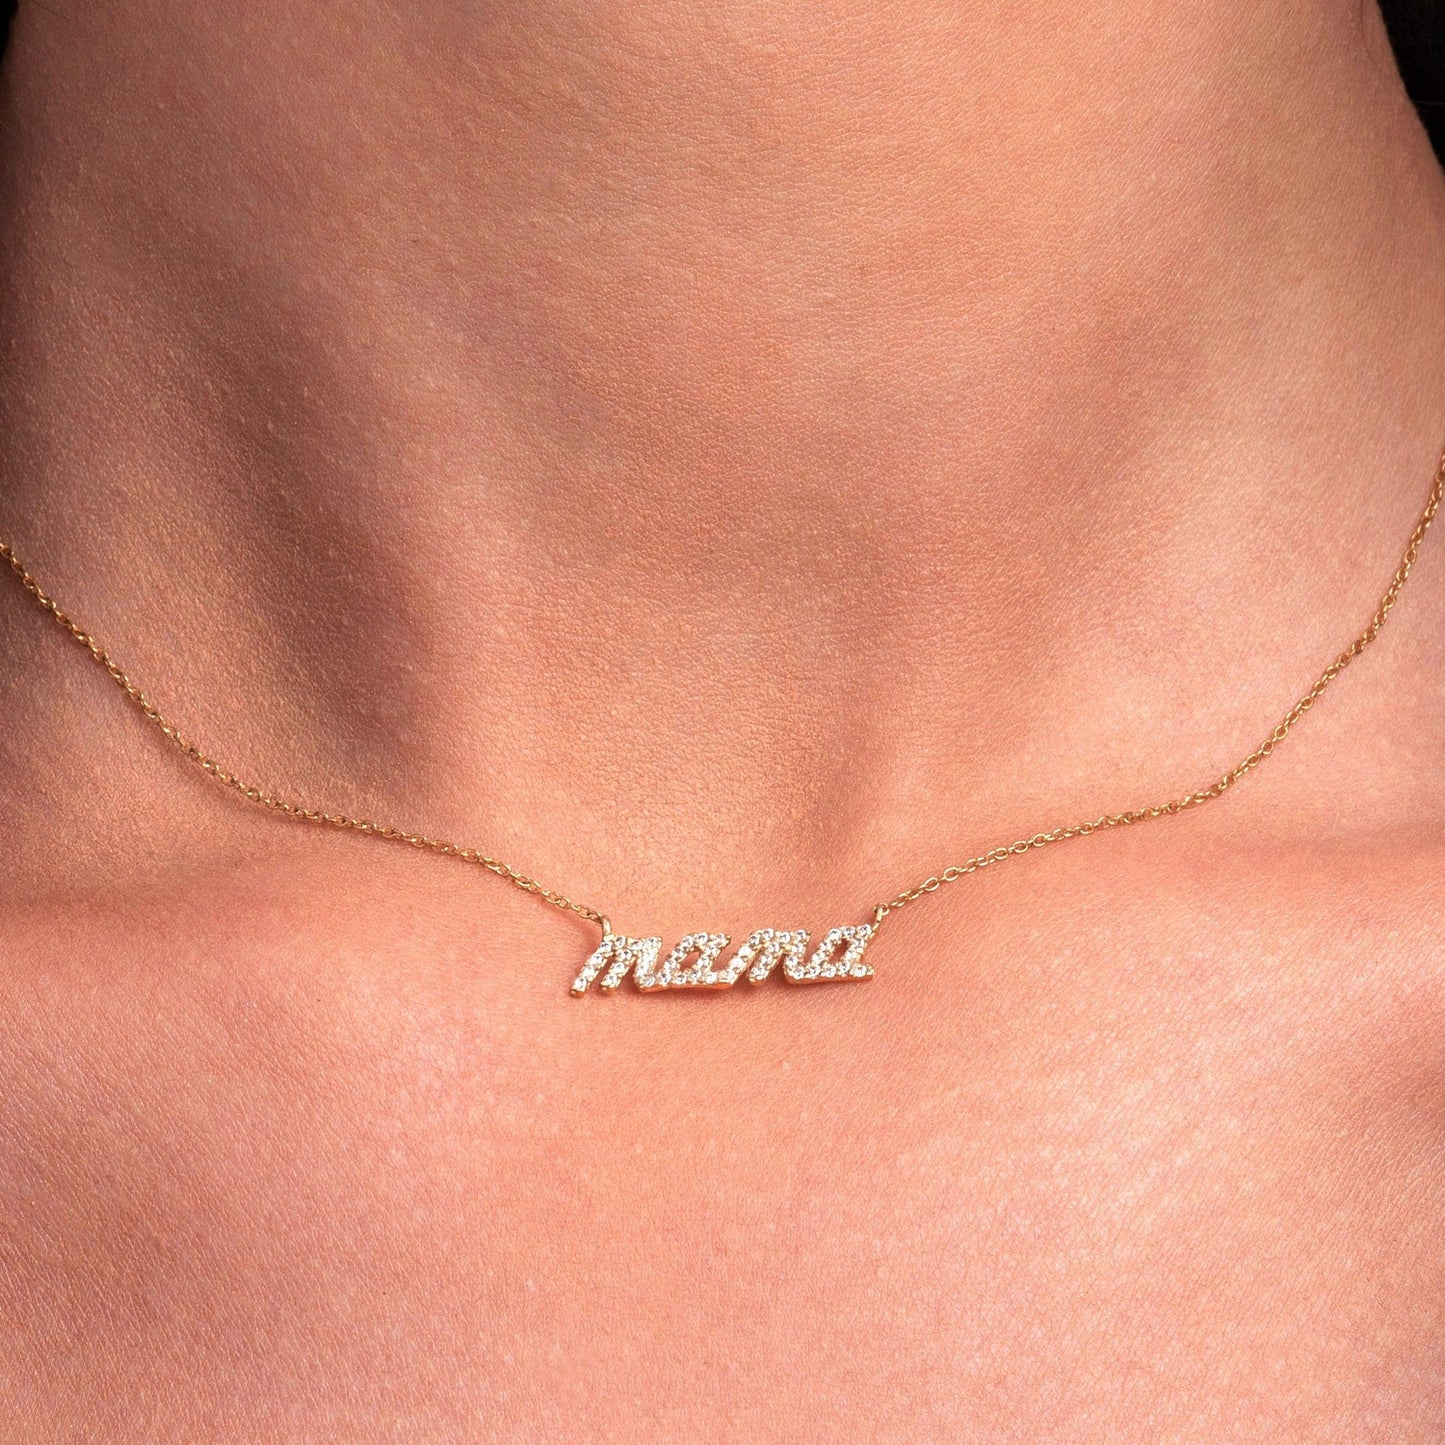 Mom Gift, Mama Necklace, Mother Necklace, Mother's Day Gifts, Mama Letter Necklace, Name Necklace, Nameplate Necklace, Dainty Necklace